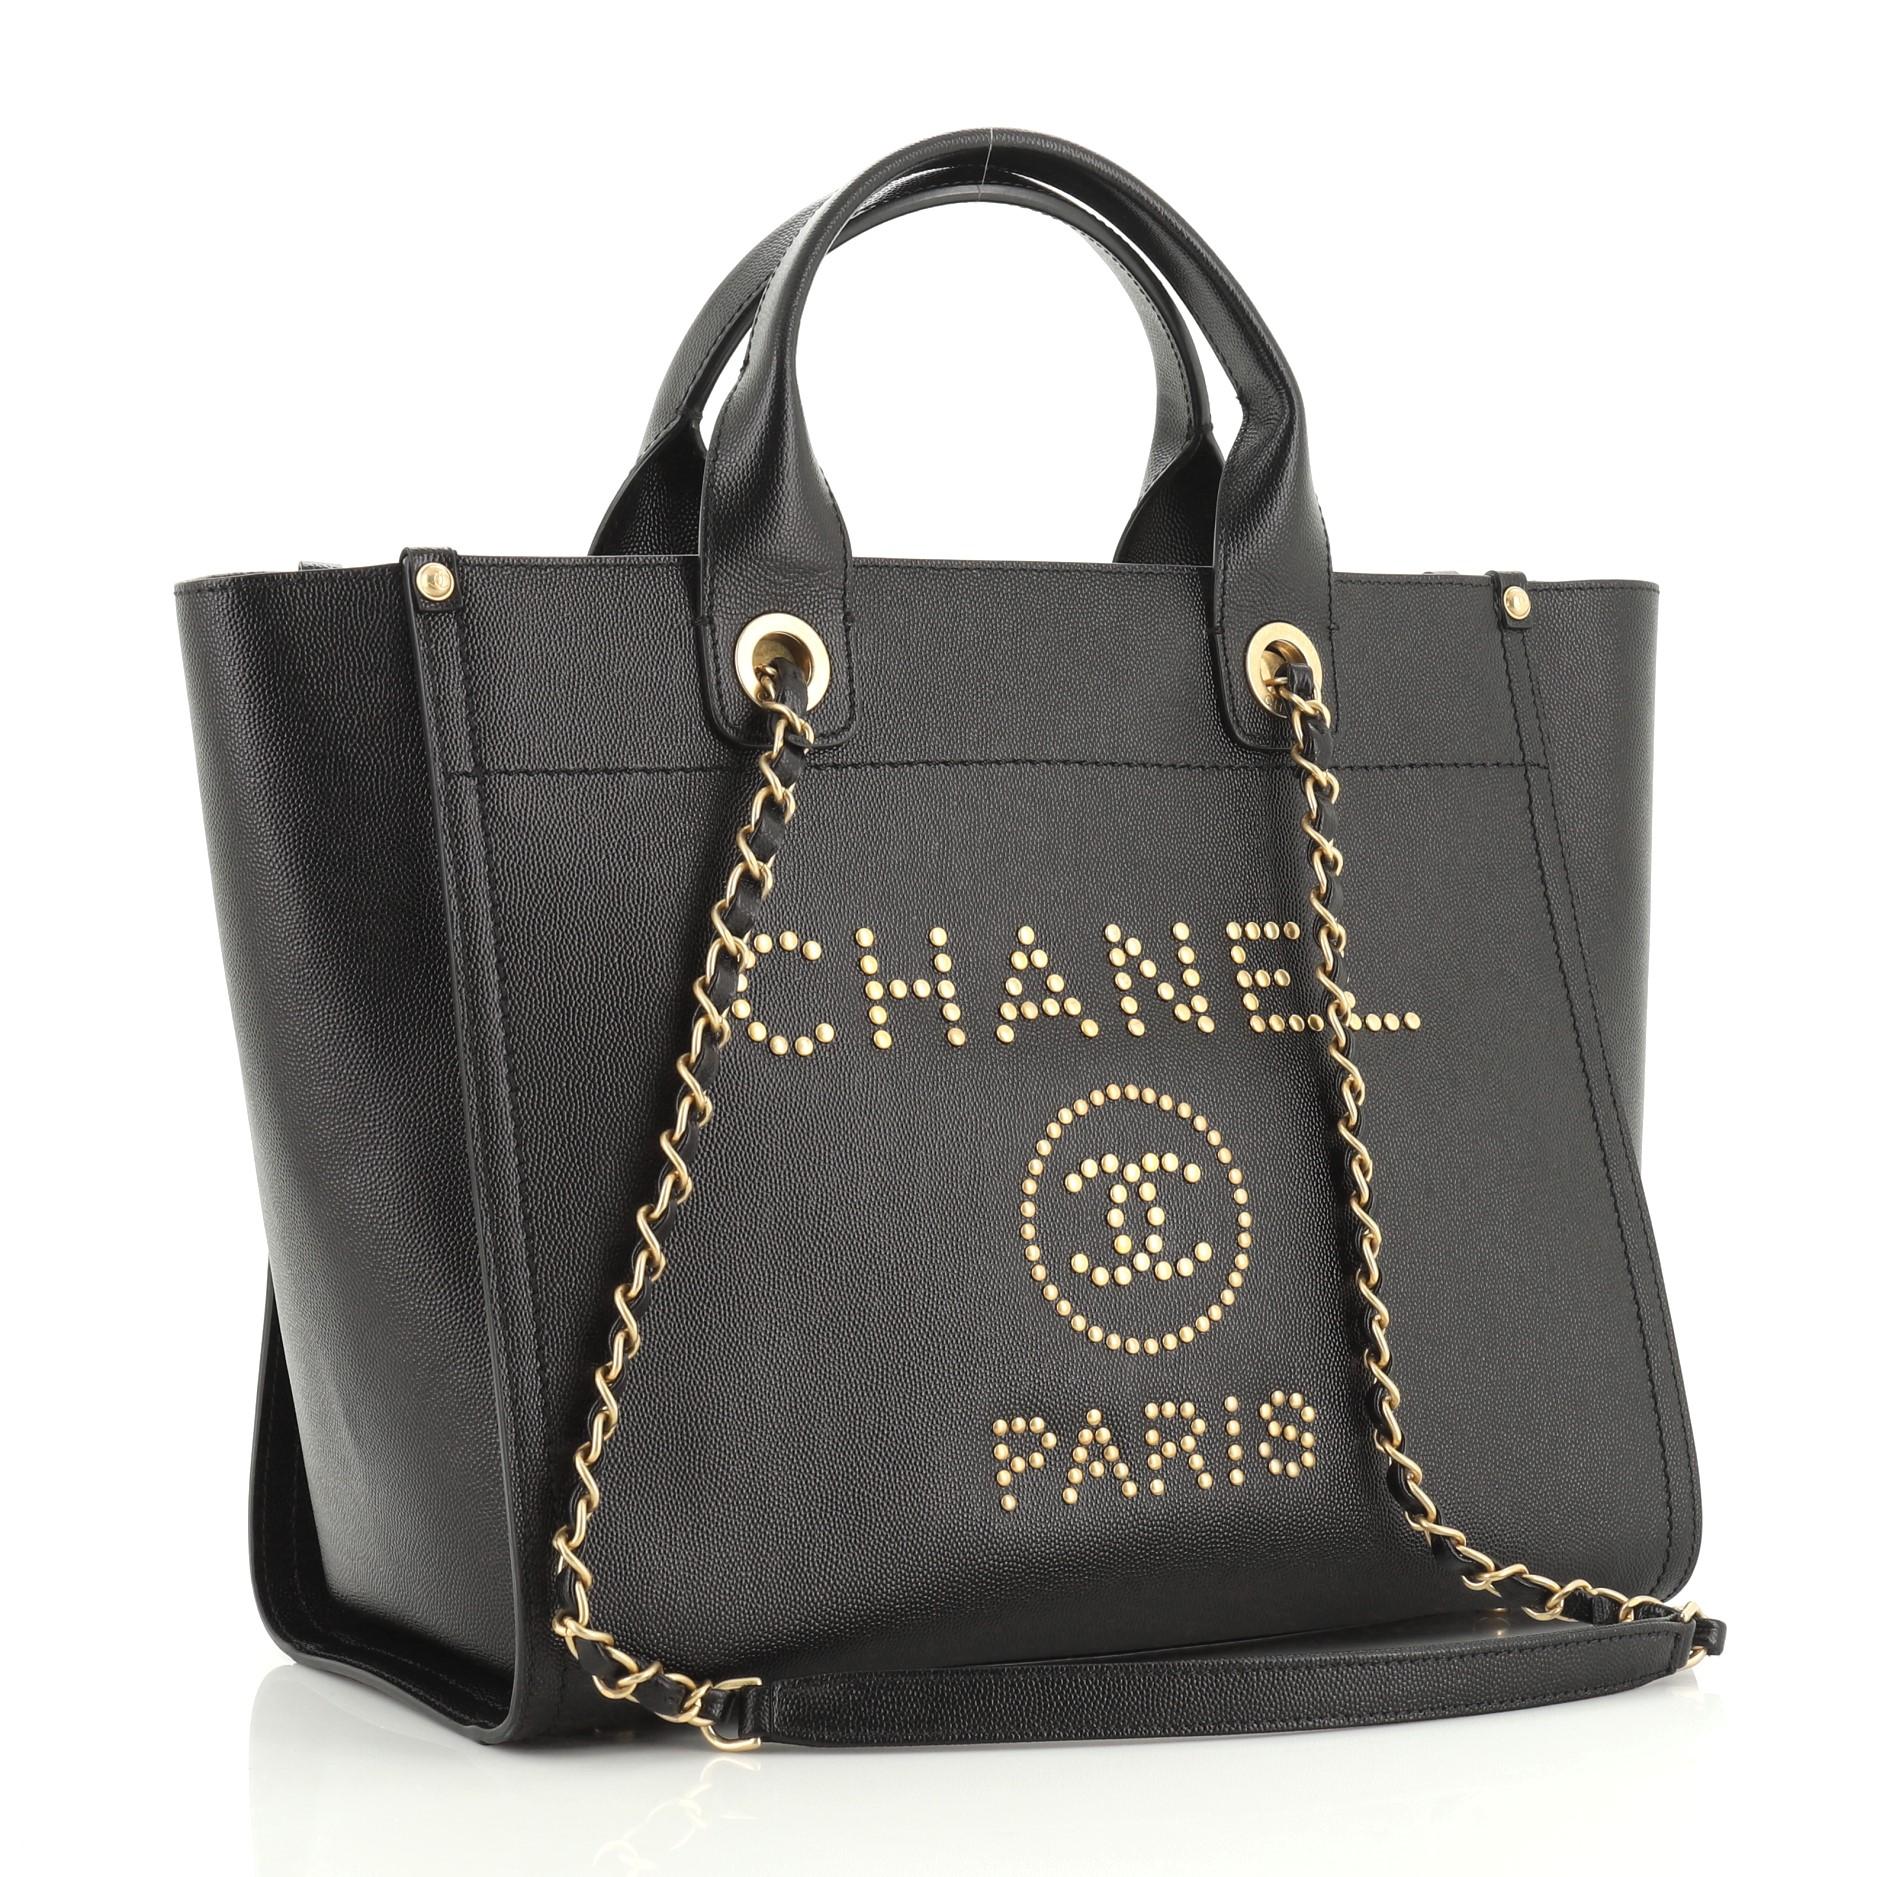 This Chanel Deauville Tote Studded Caviar Small, crafted in black studded caviar leather, features dual woven-in leather chain straps, dual top handles, studded logo at the front, and gold-tone hardware. Its magnetic snap closure opens to a black